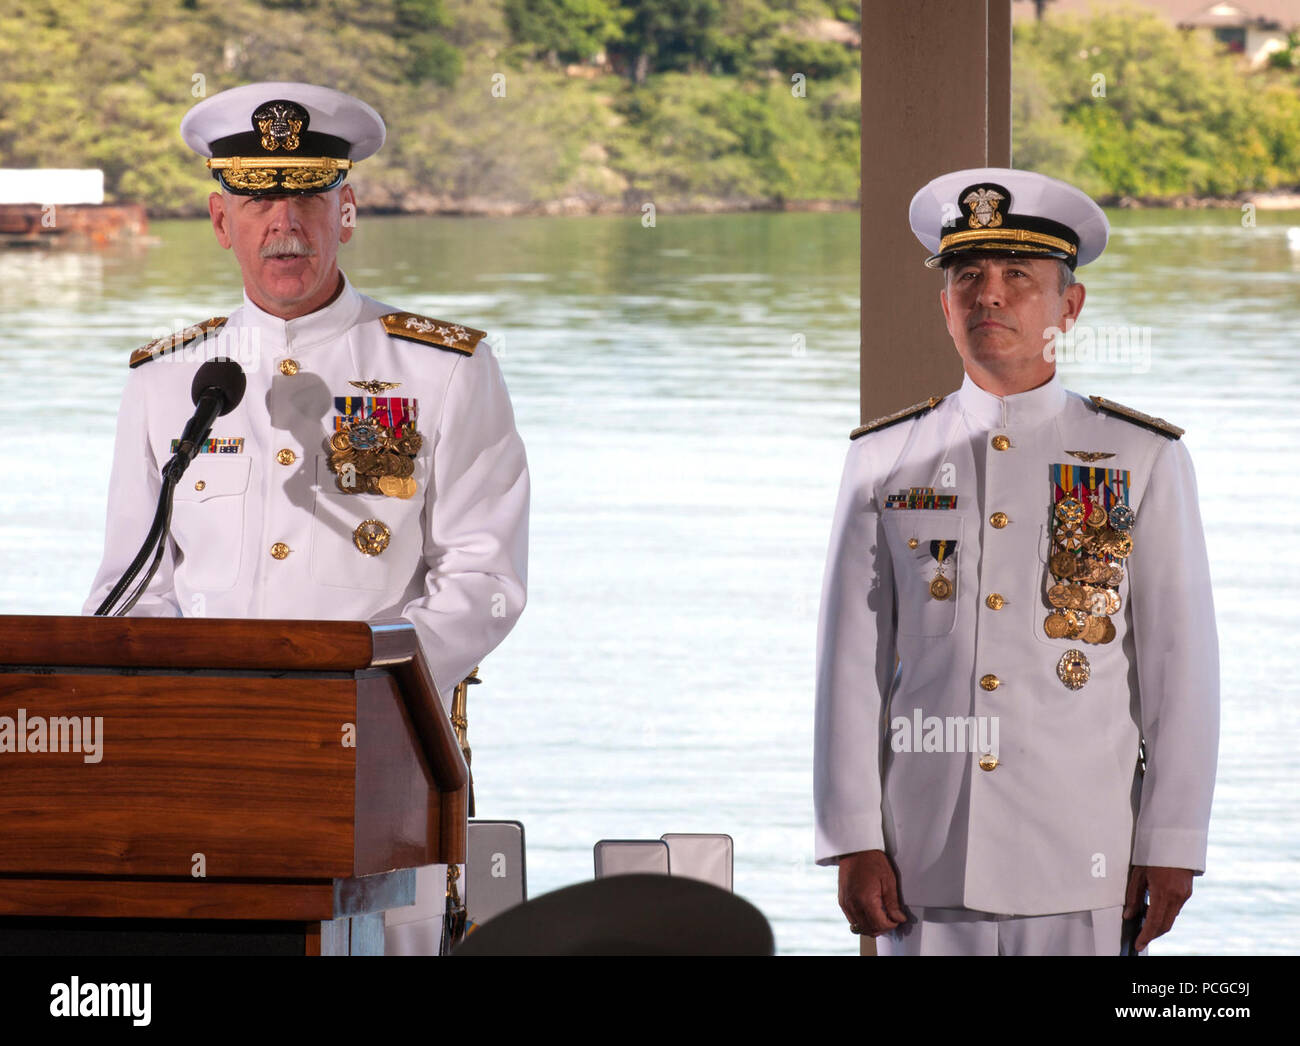 PEARL HARBOR (May 27, 2015) Adm. Scott H. Swift reads his orders as he assumes command of U.S. Pacific Fleet from Adm. Harry B. Harris Jr., right, during the joint U.S. Pacific Command and U.S. Pacific Fleet change of command ceremony at Joint Base Pearl Harbor-Hickam.  Swift relieved Harris as the U.S. Pacific Fleet commander and Harris assumed command of U.S. Pacific Command from Adm. Samuel J. Locklear III. Stock Photo